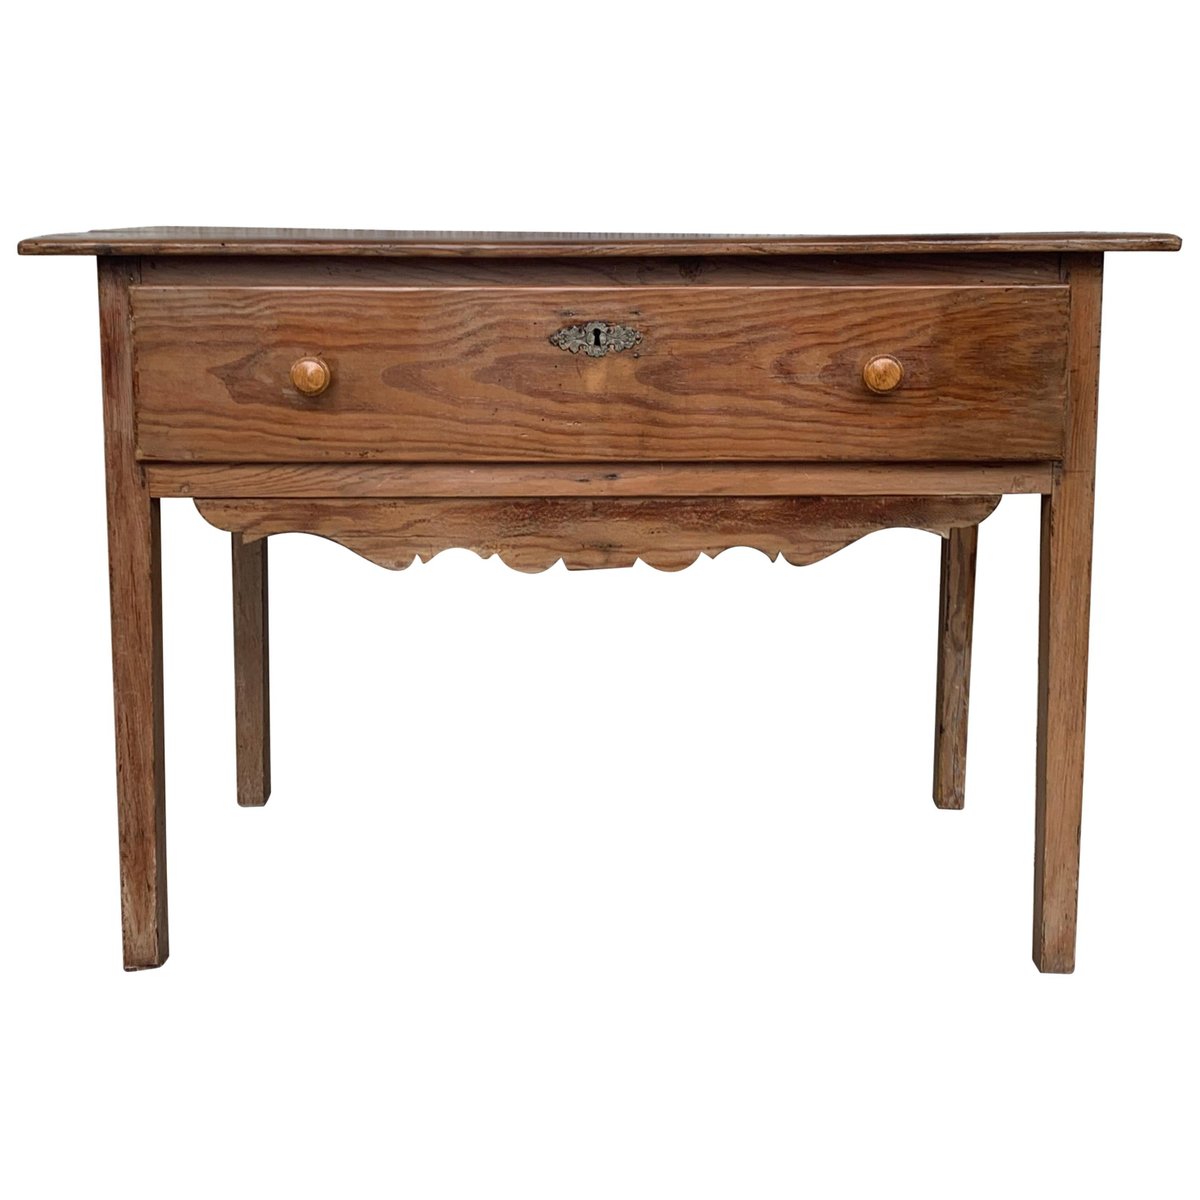 country french style pine farmhouse table with drawer PSK-1002594